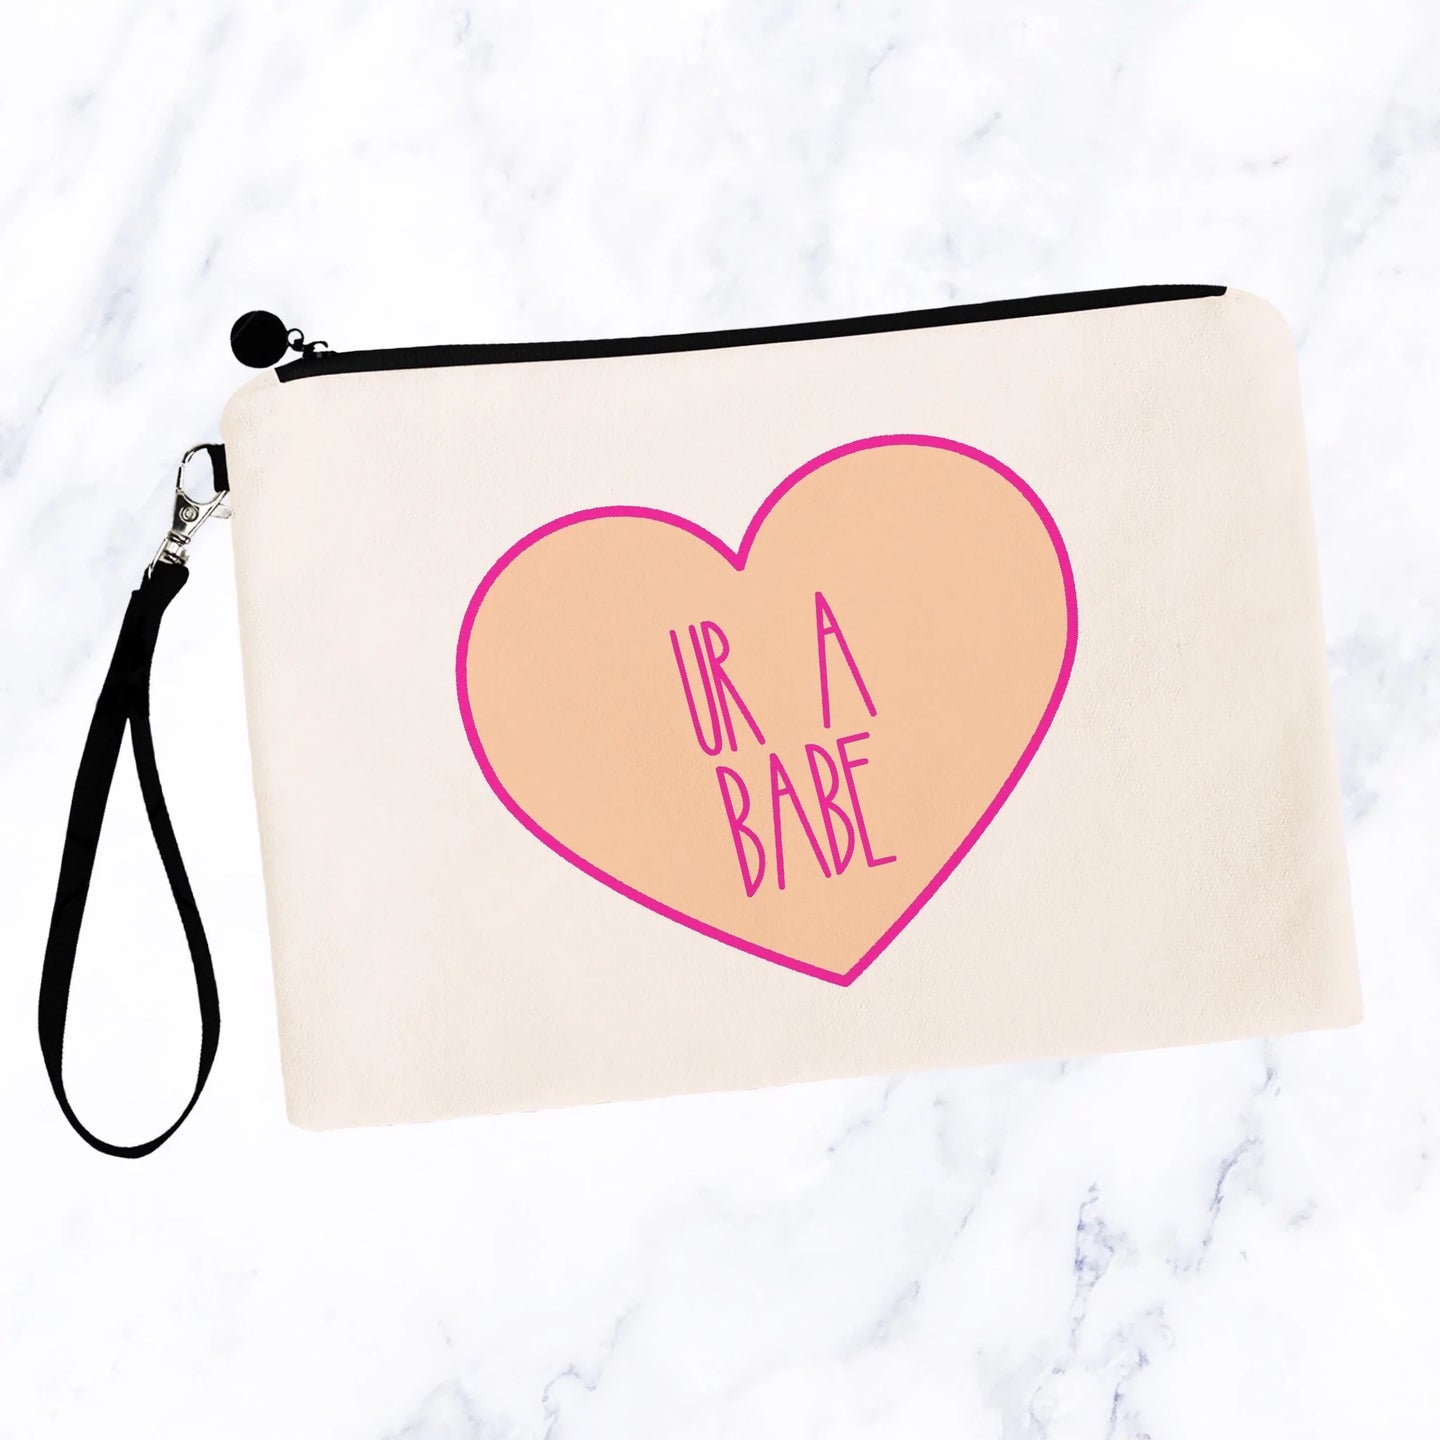 Ur A Babe Candy Heart Cosmetic Bag